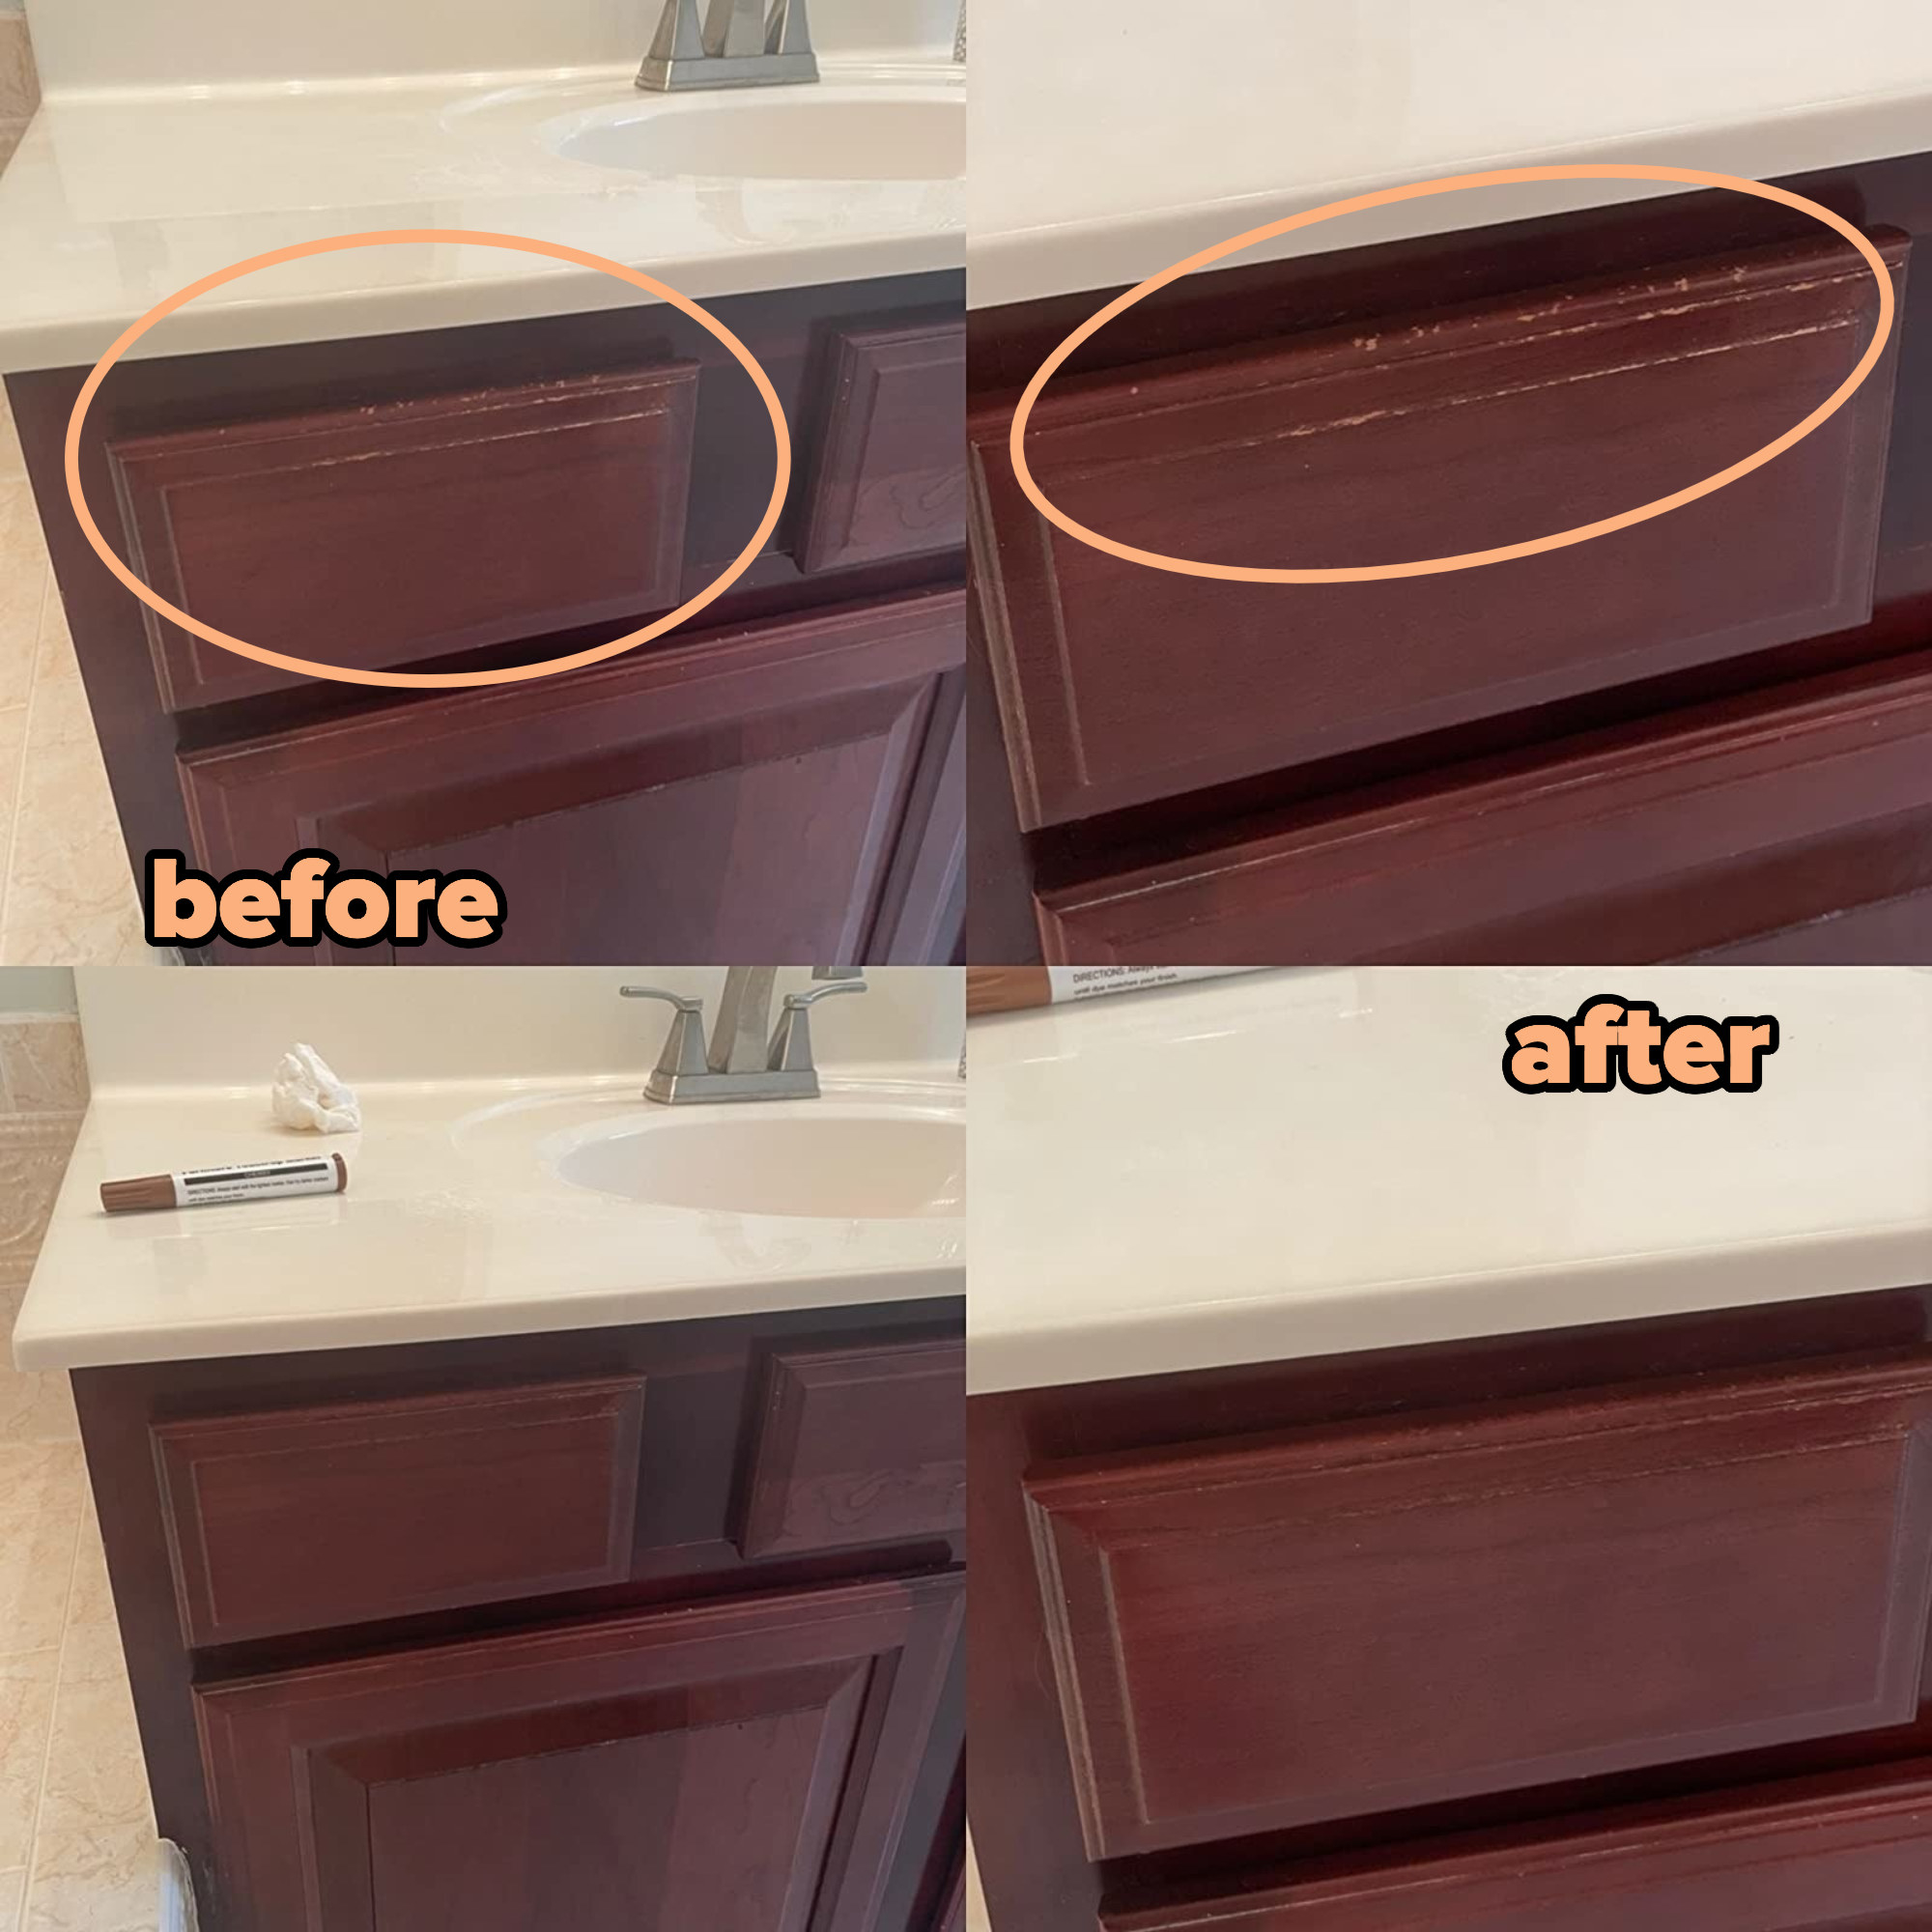 A reviewer photo on the top is the before with chipped wood showing discoloration on the furniture and on the bottom the after which shows no discoloration and the furniture looks like nothing every happened to it at all